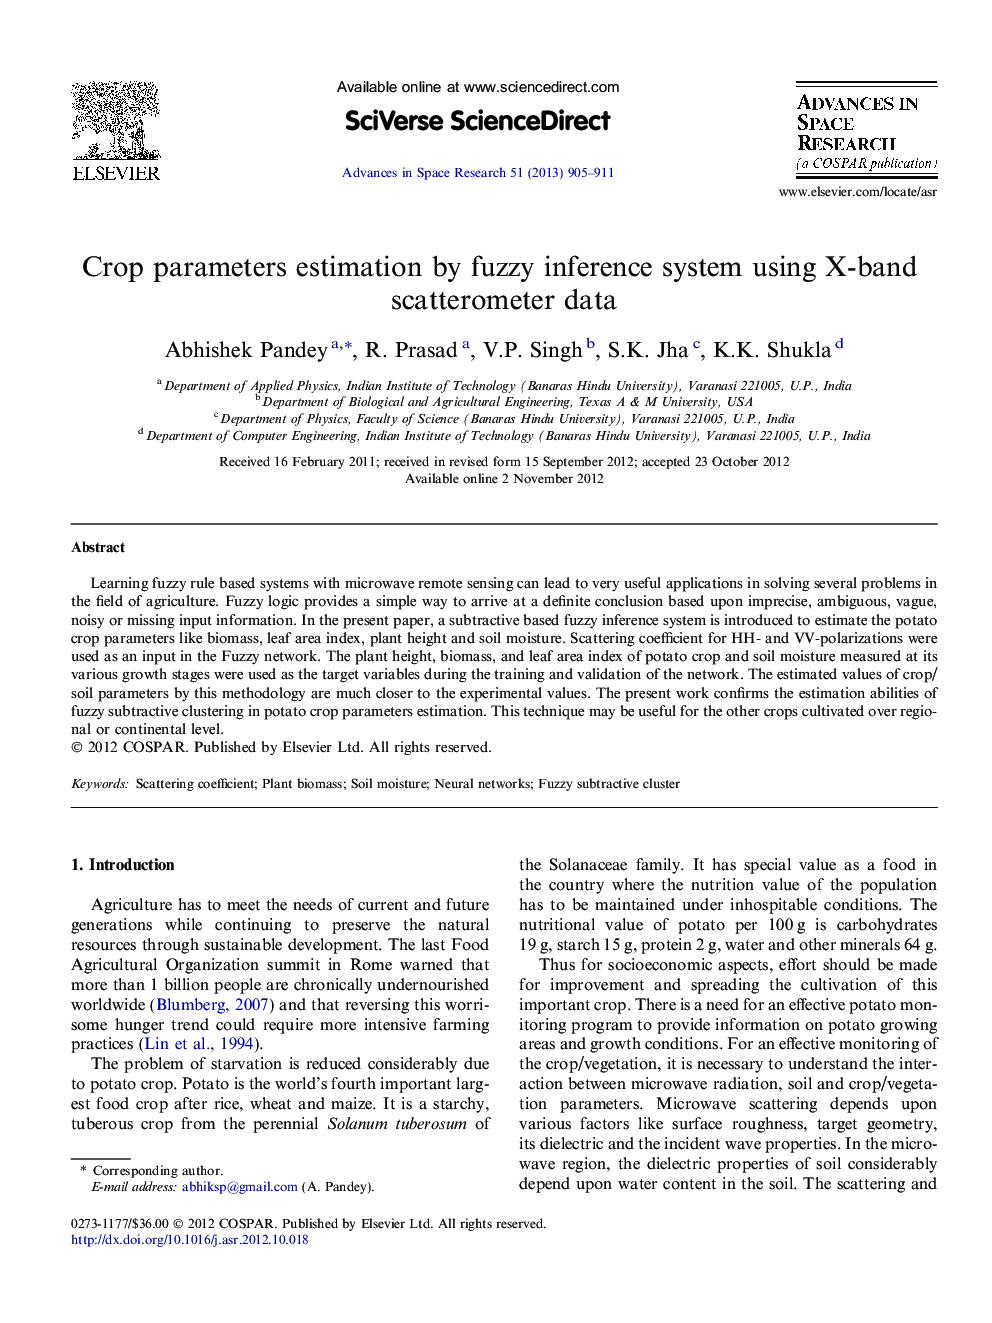 Crop parameters estimation by fuzzy inference system using X-band scatterometer data